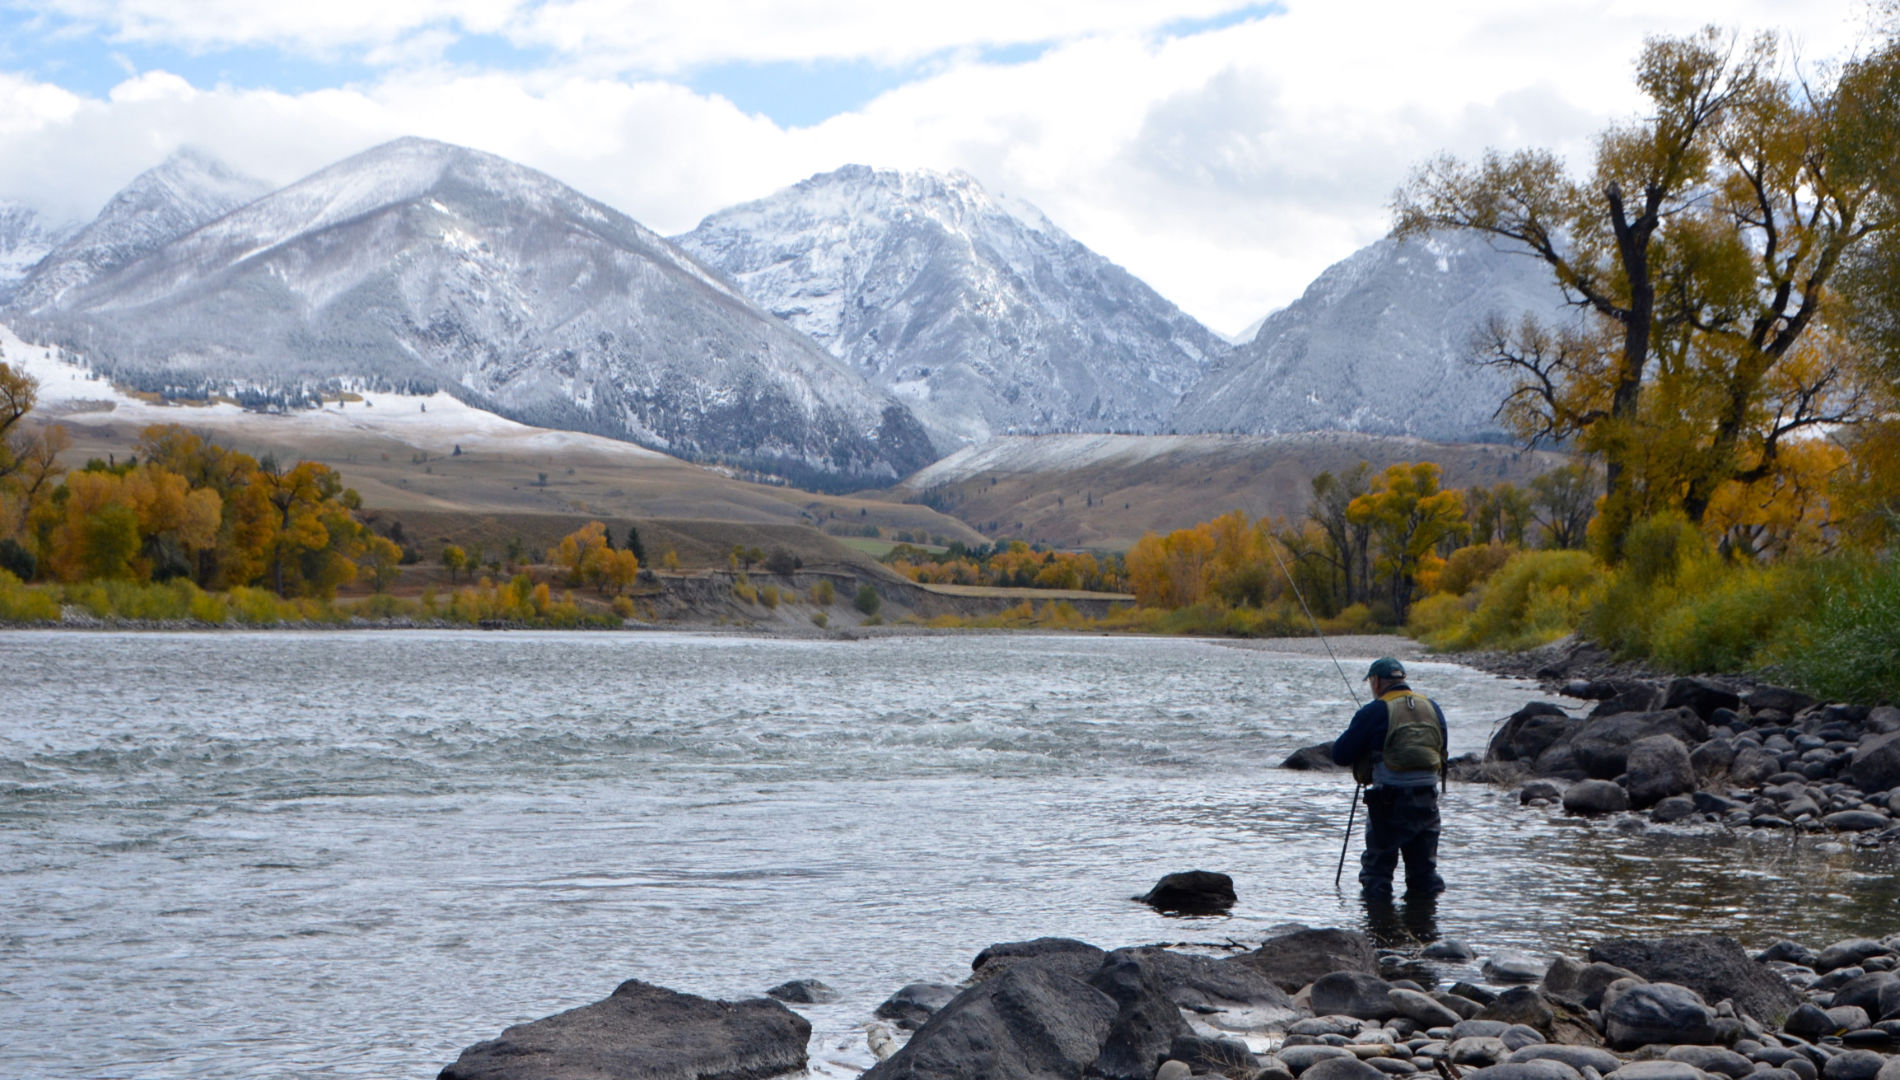 Wade Fishing on the Yellowstone River in October